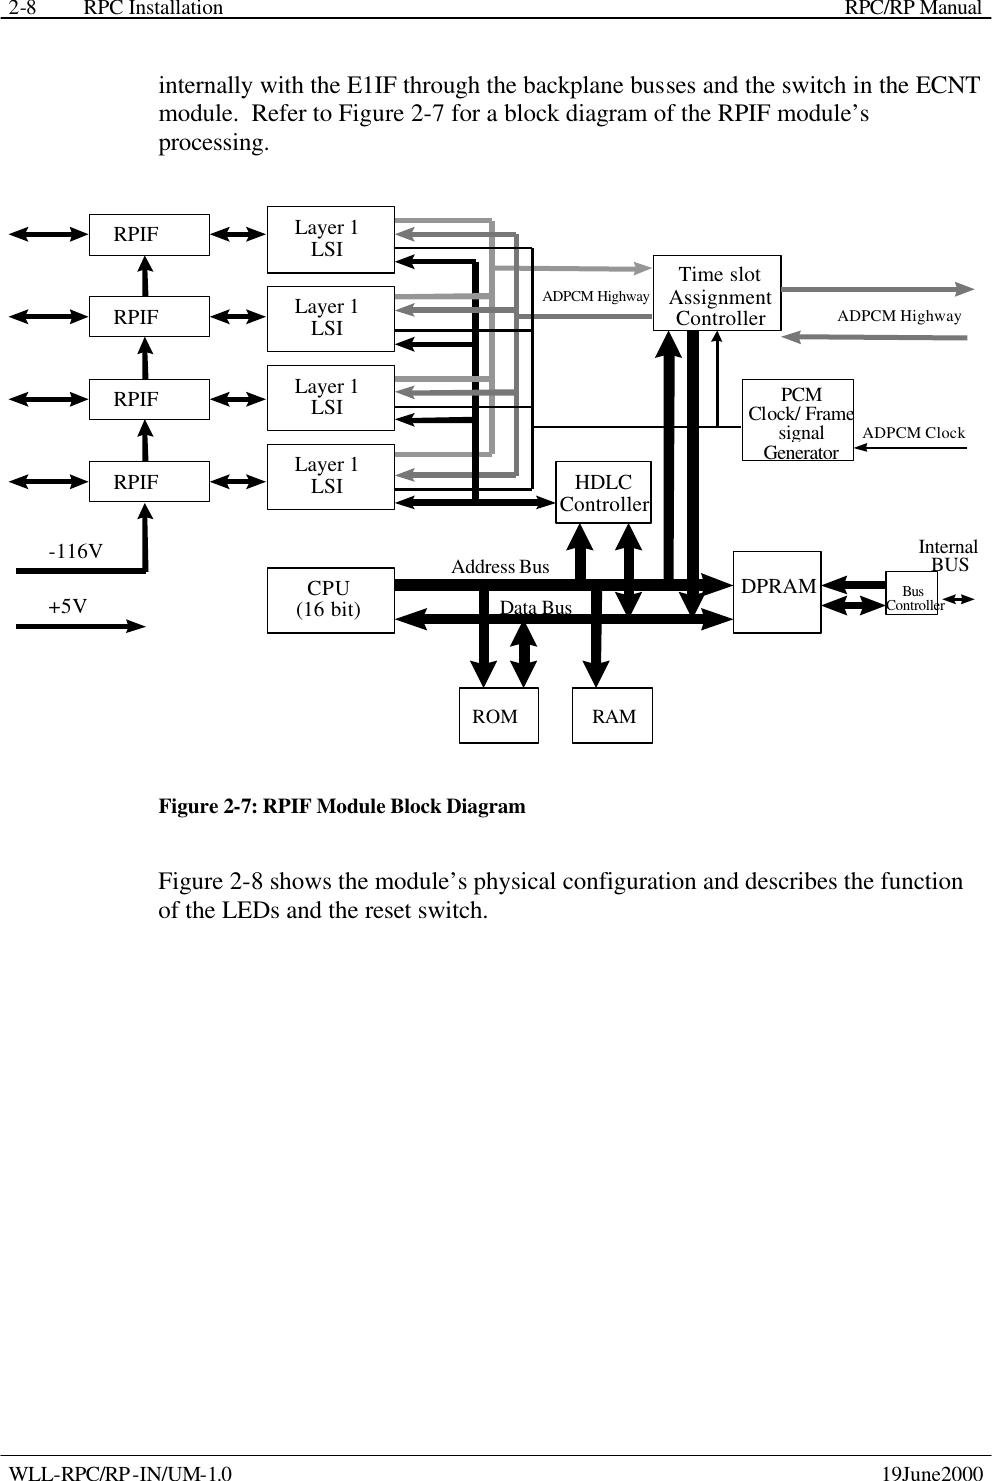 RPC Installation    RPC/RP Manual WLL-RPC/RP-IN/UM-1.0    19June2000 2-8internally with the E1IF through the backplane busses and the switch in the ECNT module.  Refer to Figure 2-7 for a block diagram of the RPIF module’s processing.  RPIF RPIF RPIF RPIF Layer 1 LSI Layer 1 LSI Layer 1 LSI Layer 1 LSI -116V +5V Time slot Assignment Controller HDLC Controller CPU (16 bit) Bus Controller DPRAM RAM ROM Address Bus Data Bus ADPCM Highway ADPCM Highway PCM Clock/ Frame signal Generator ADPCM Clock Internal  BUS  Figure 2-7: RPIF Module Block Diagram Figure 2-8 shows the module’s physical configuration and describes the function of the LEDs and the reset switch. 